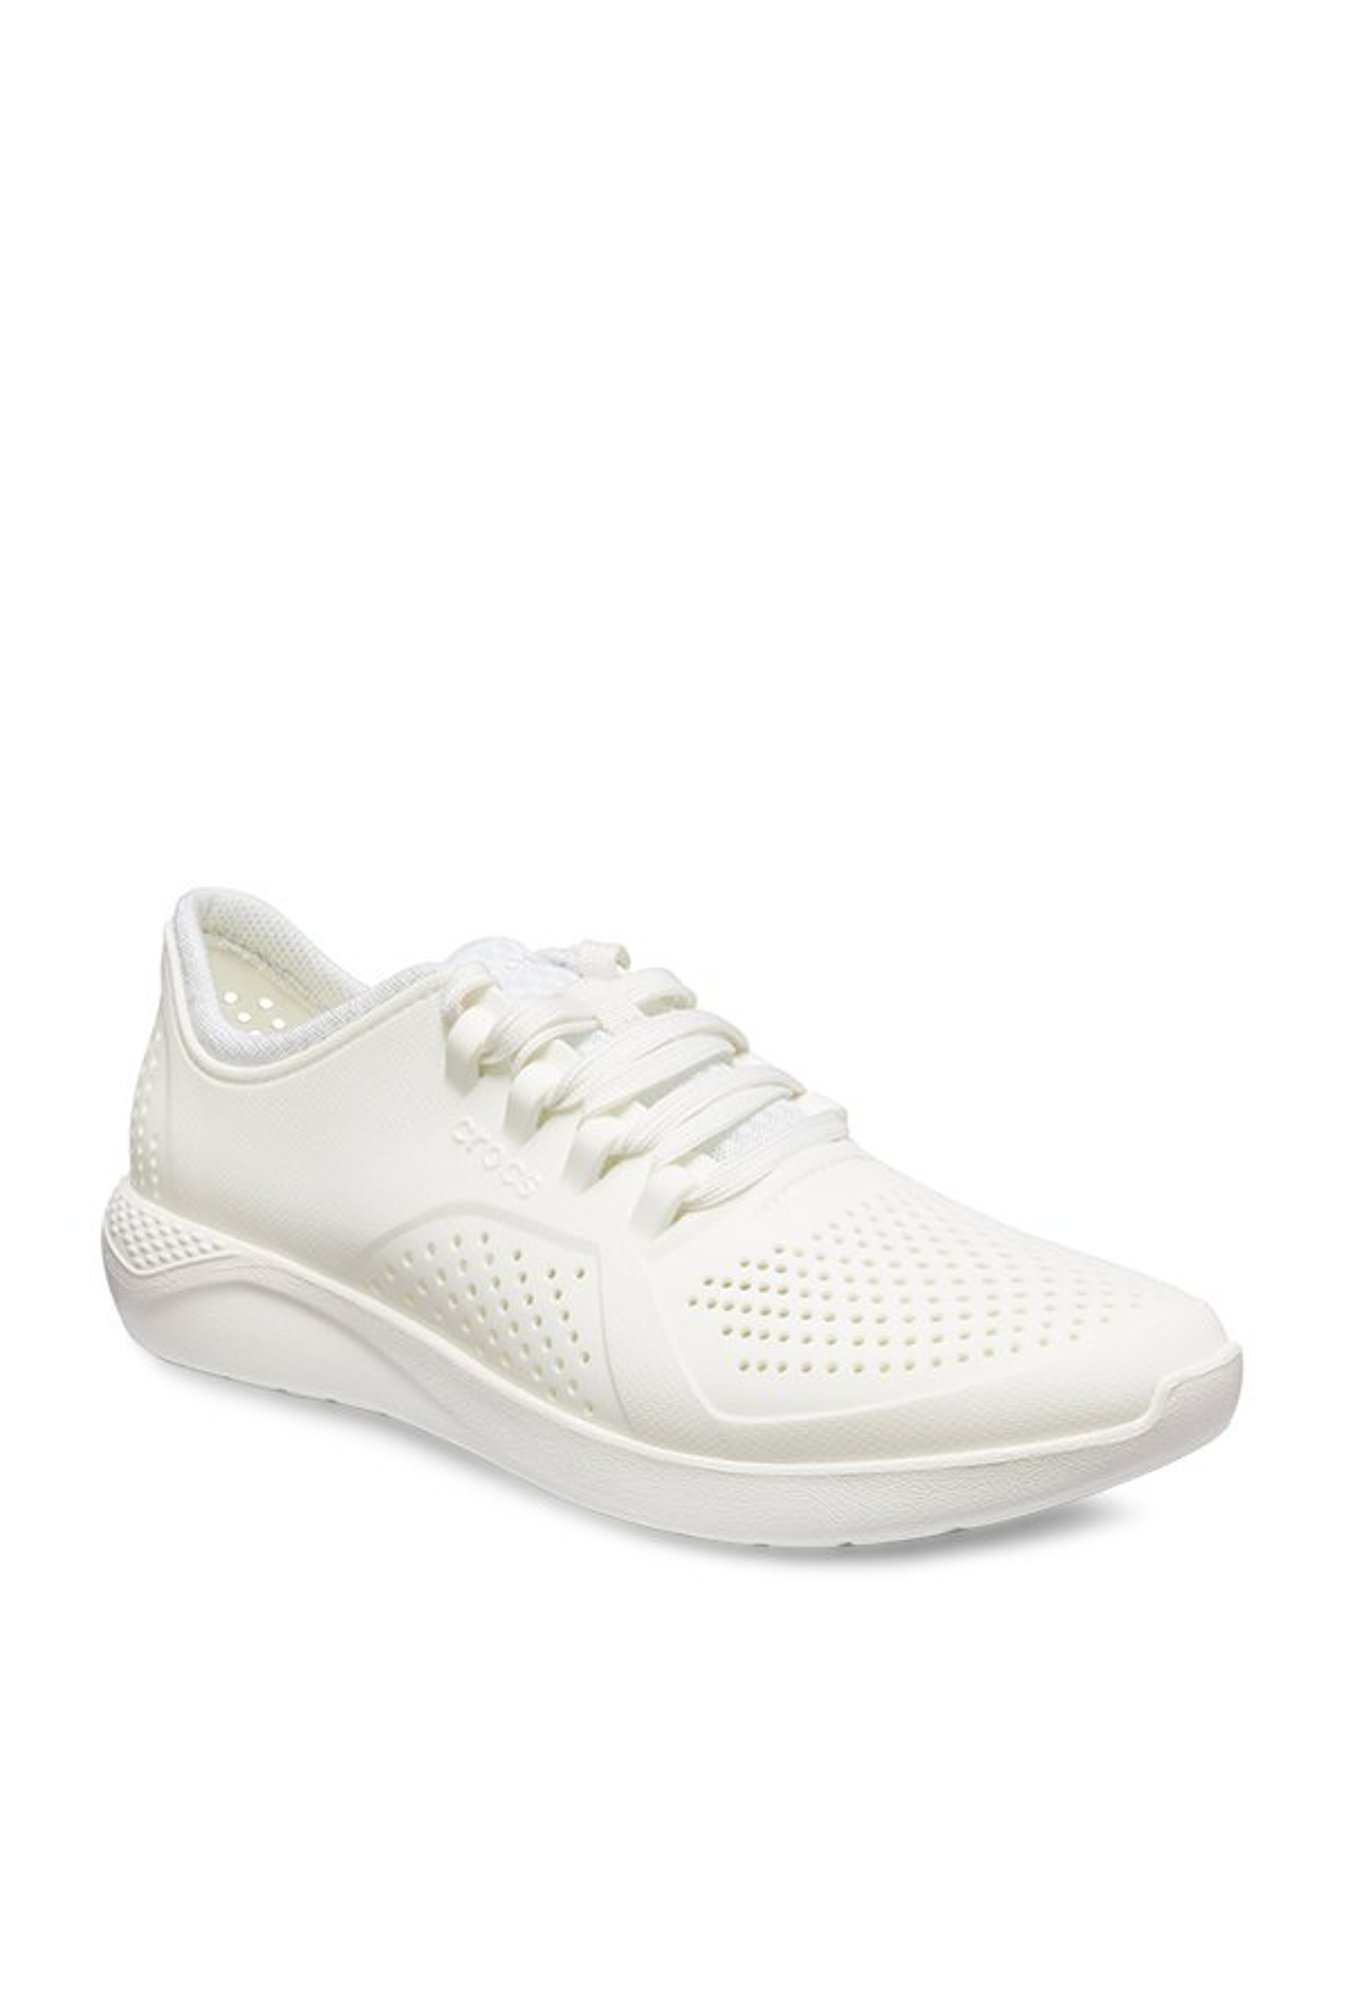 Crocs LiteRide Pacer White Casual Shoes 